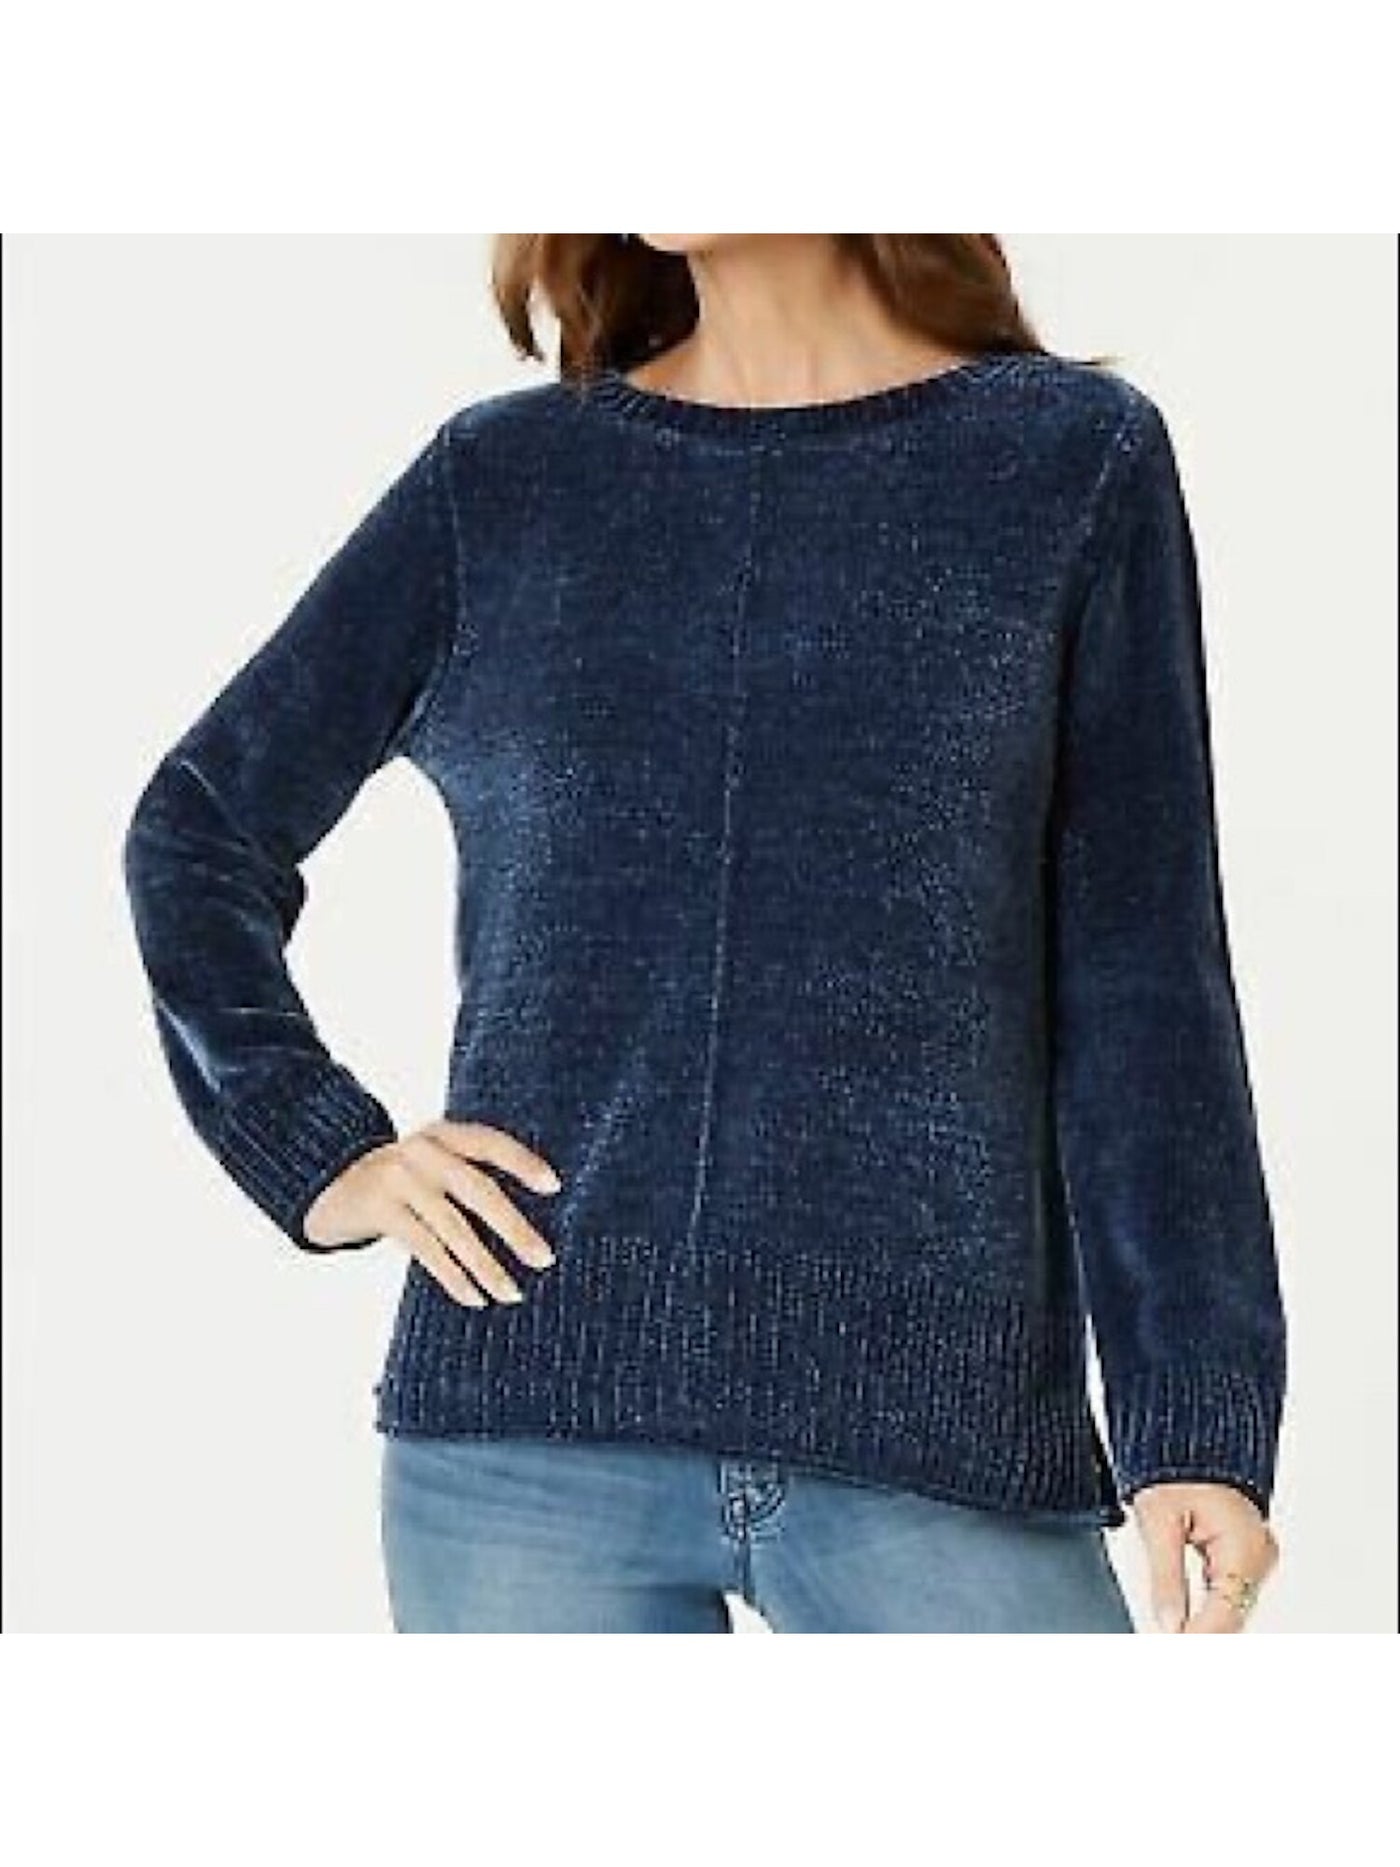 STYLE & COMPANY Womens Navy Textured Heather Long Sleeve Crew Neck Blouse S